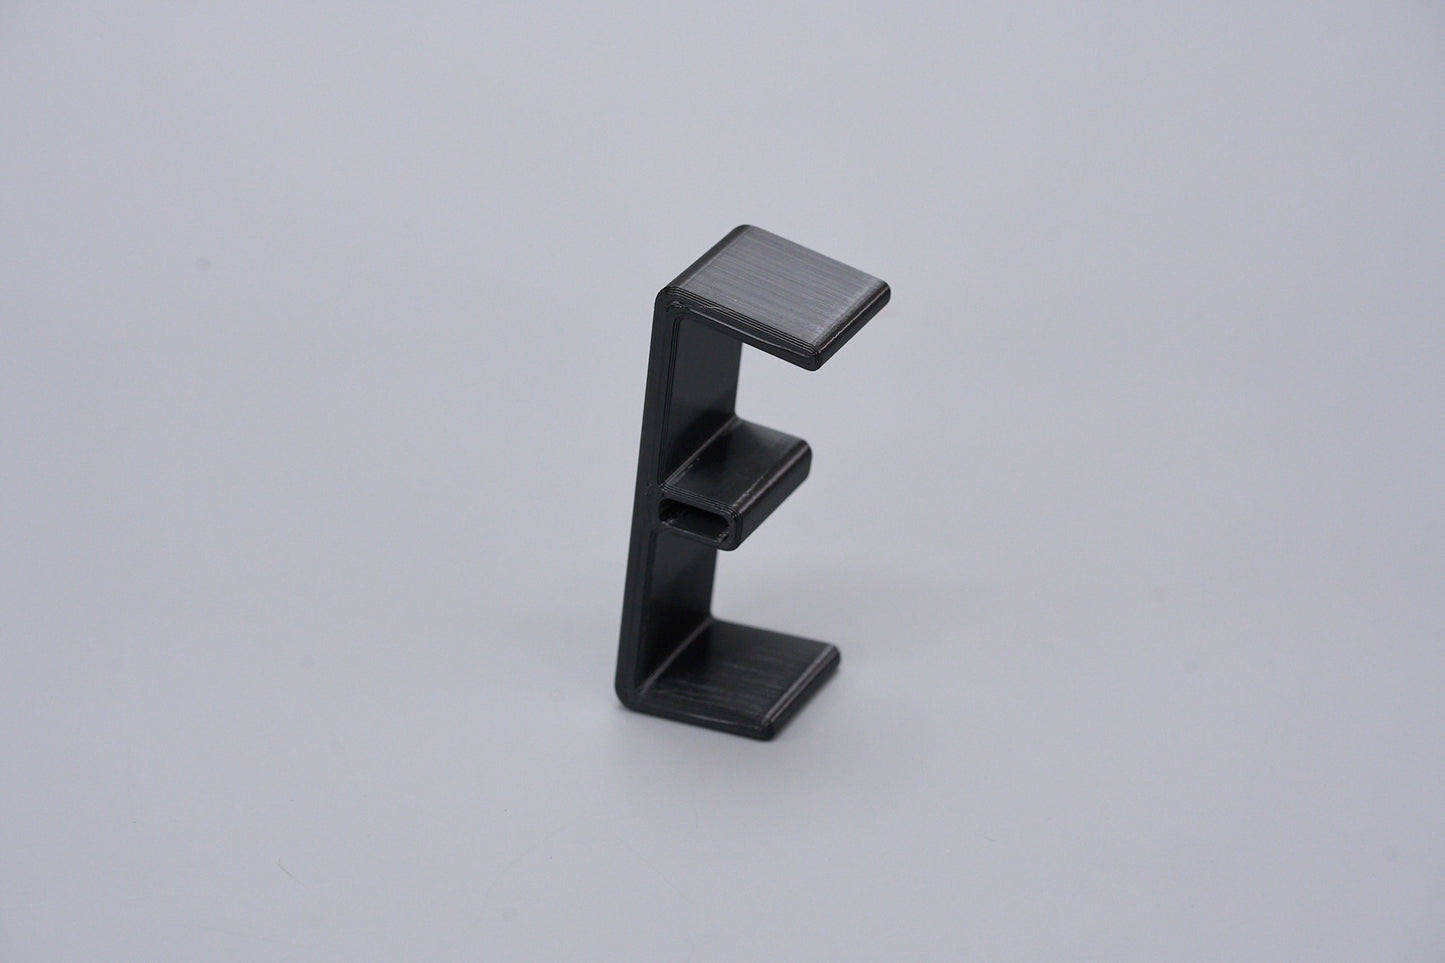 Table spacer for swivel tables in motorhomes